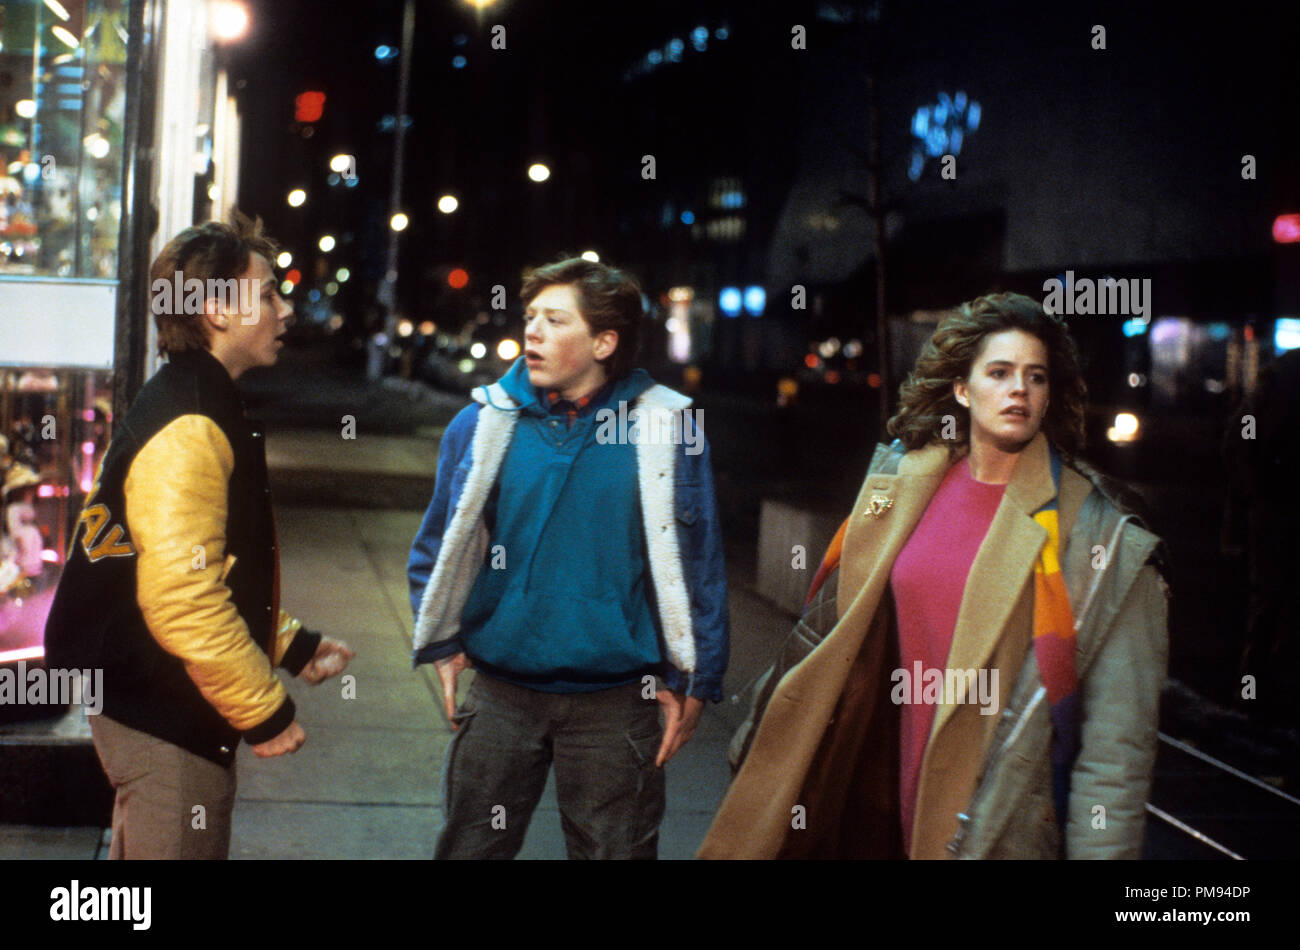 Studio Publicity Still from 'Adventures in Babysitting' Keith Coogan, Anthony Rapp, Elisabeth Shue © 1987 Touchstone Pictures  All Rights Reserved   File Reference # 31697331THA  For Editorial Use Only Stock Photo